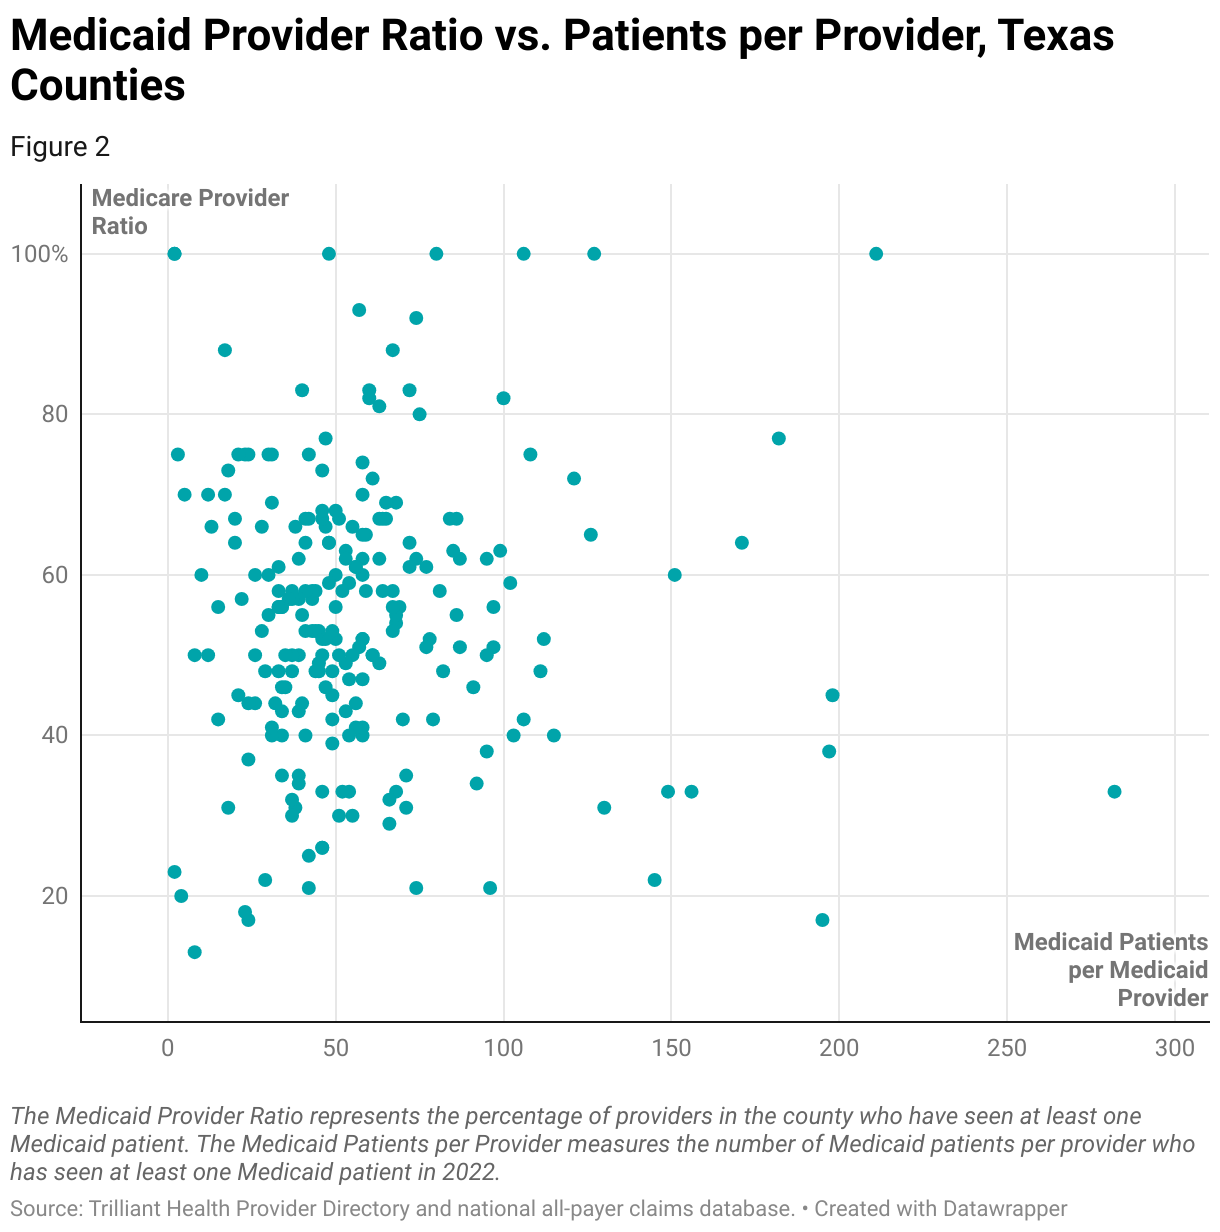 The scatter plot has Medicaid Providers / All Providers in the y-axis, with the ratio of Medicaid patients per Medicaid provider in the x-axis.